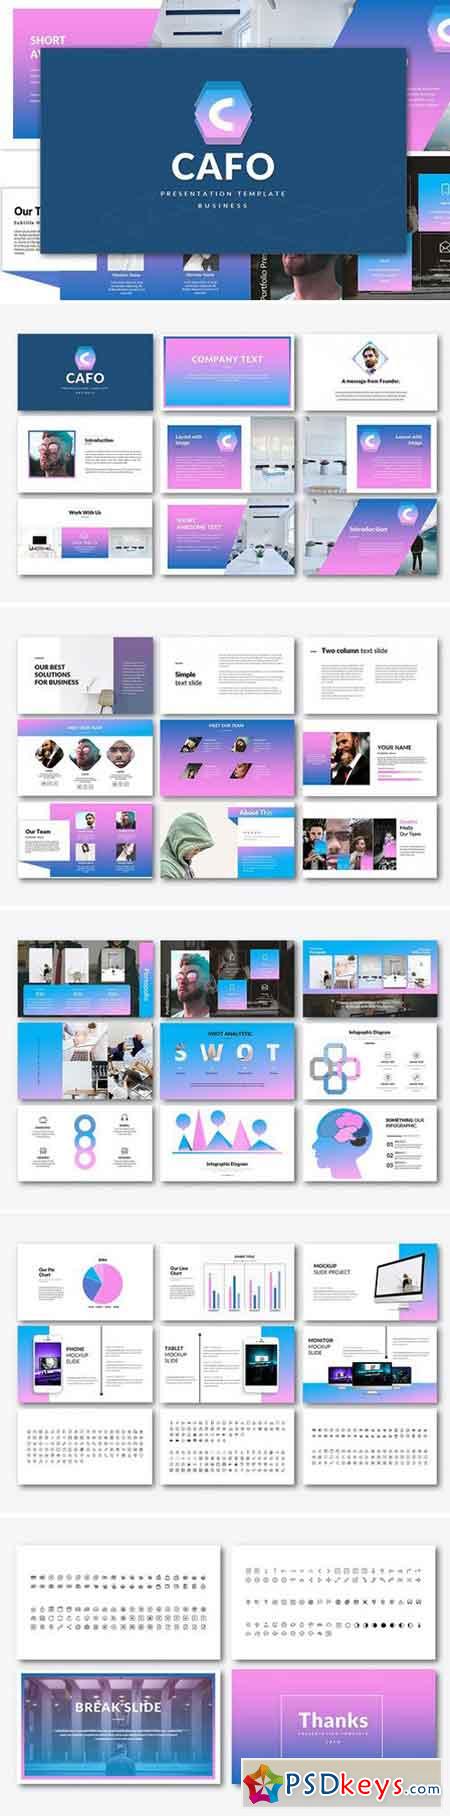 Cafo Business Powerpoint Template 1927034